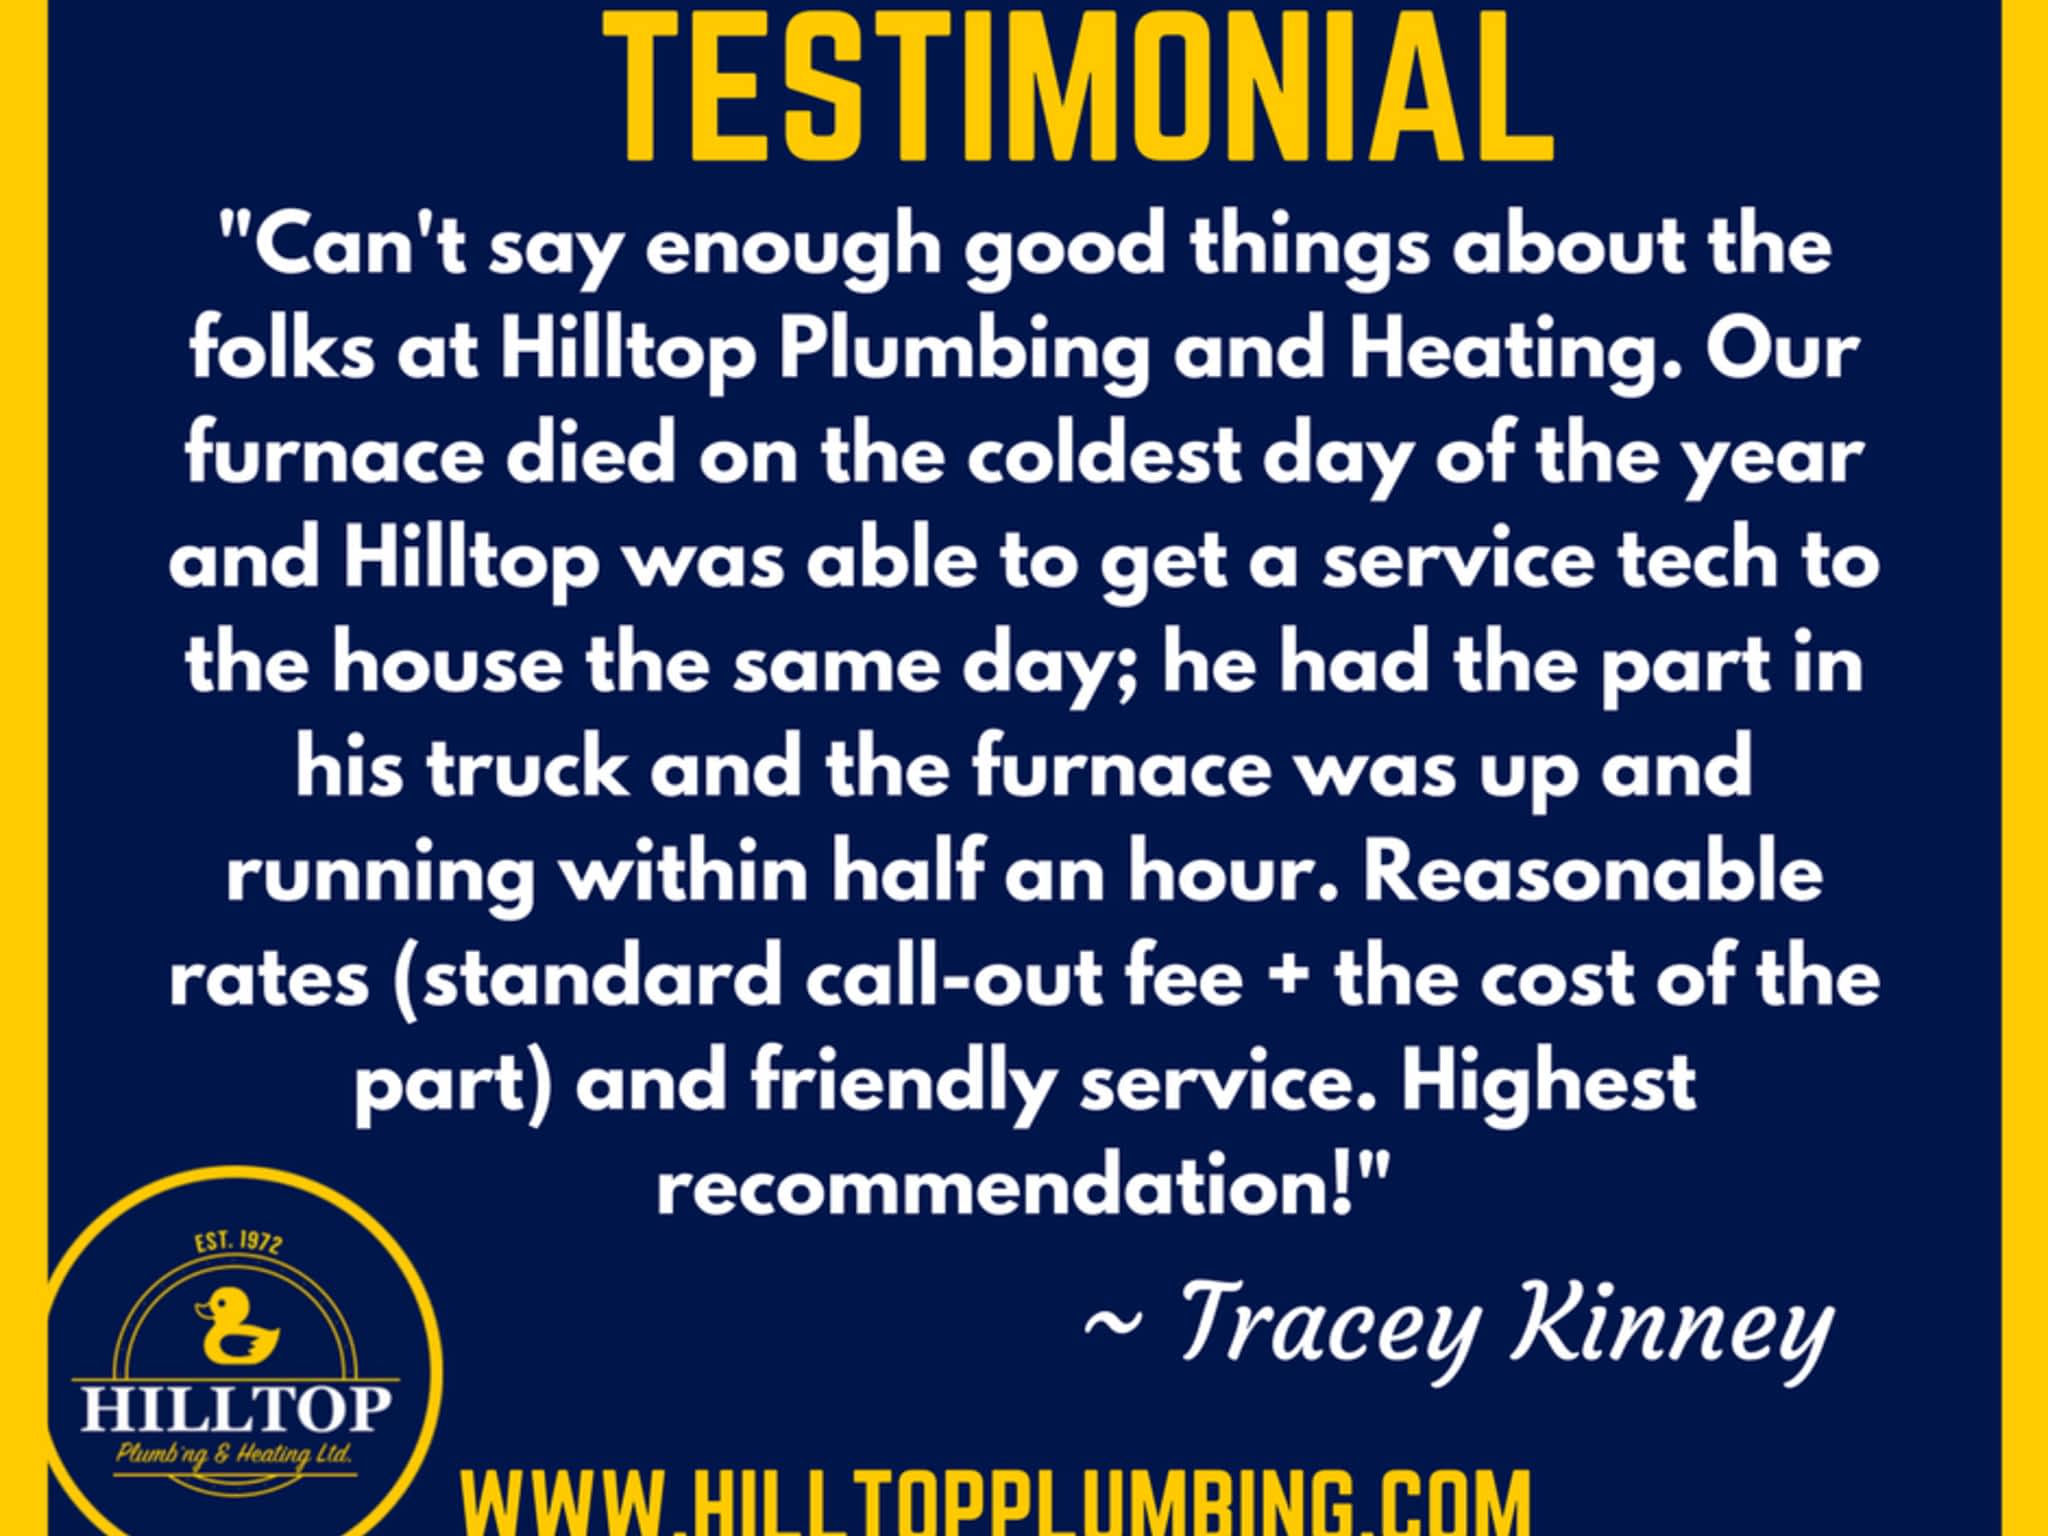 photo Hilltop Plumbing and Heating 2016